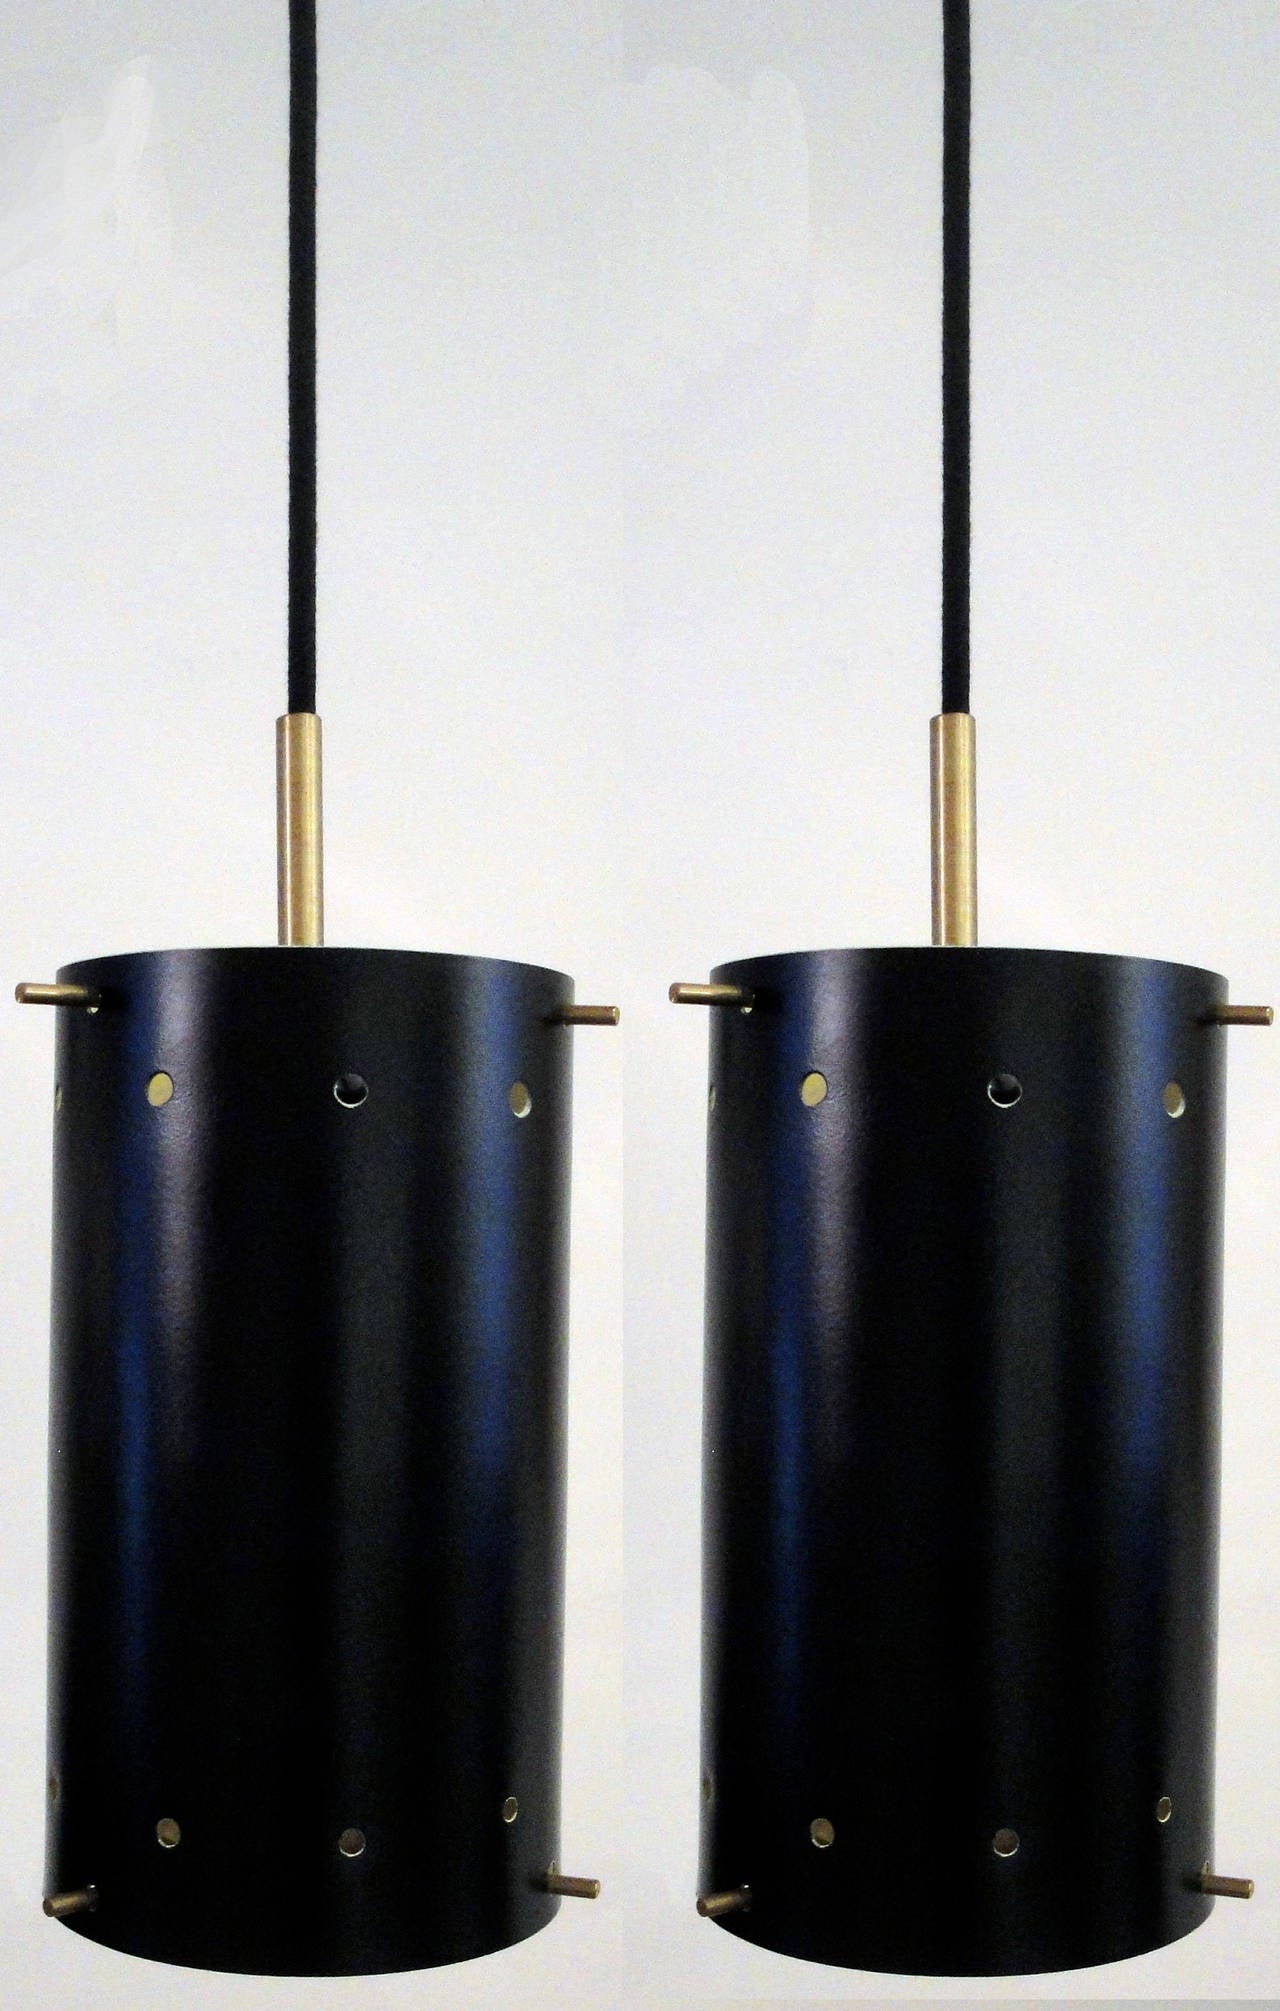 Black enameled metal shades with perforated round holes,
off-white rings at the bottom and brass fittings. The lengths can be adjusted to your needs.